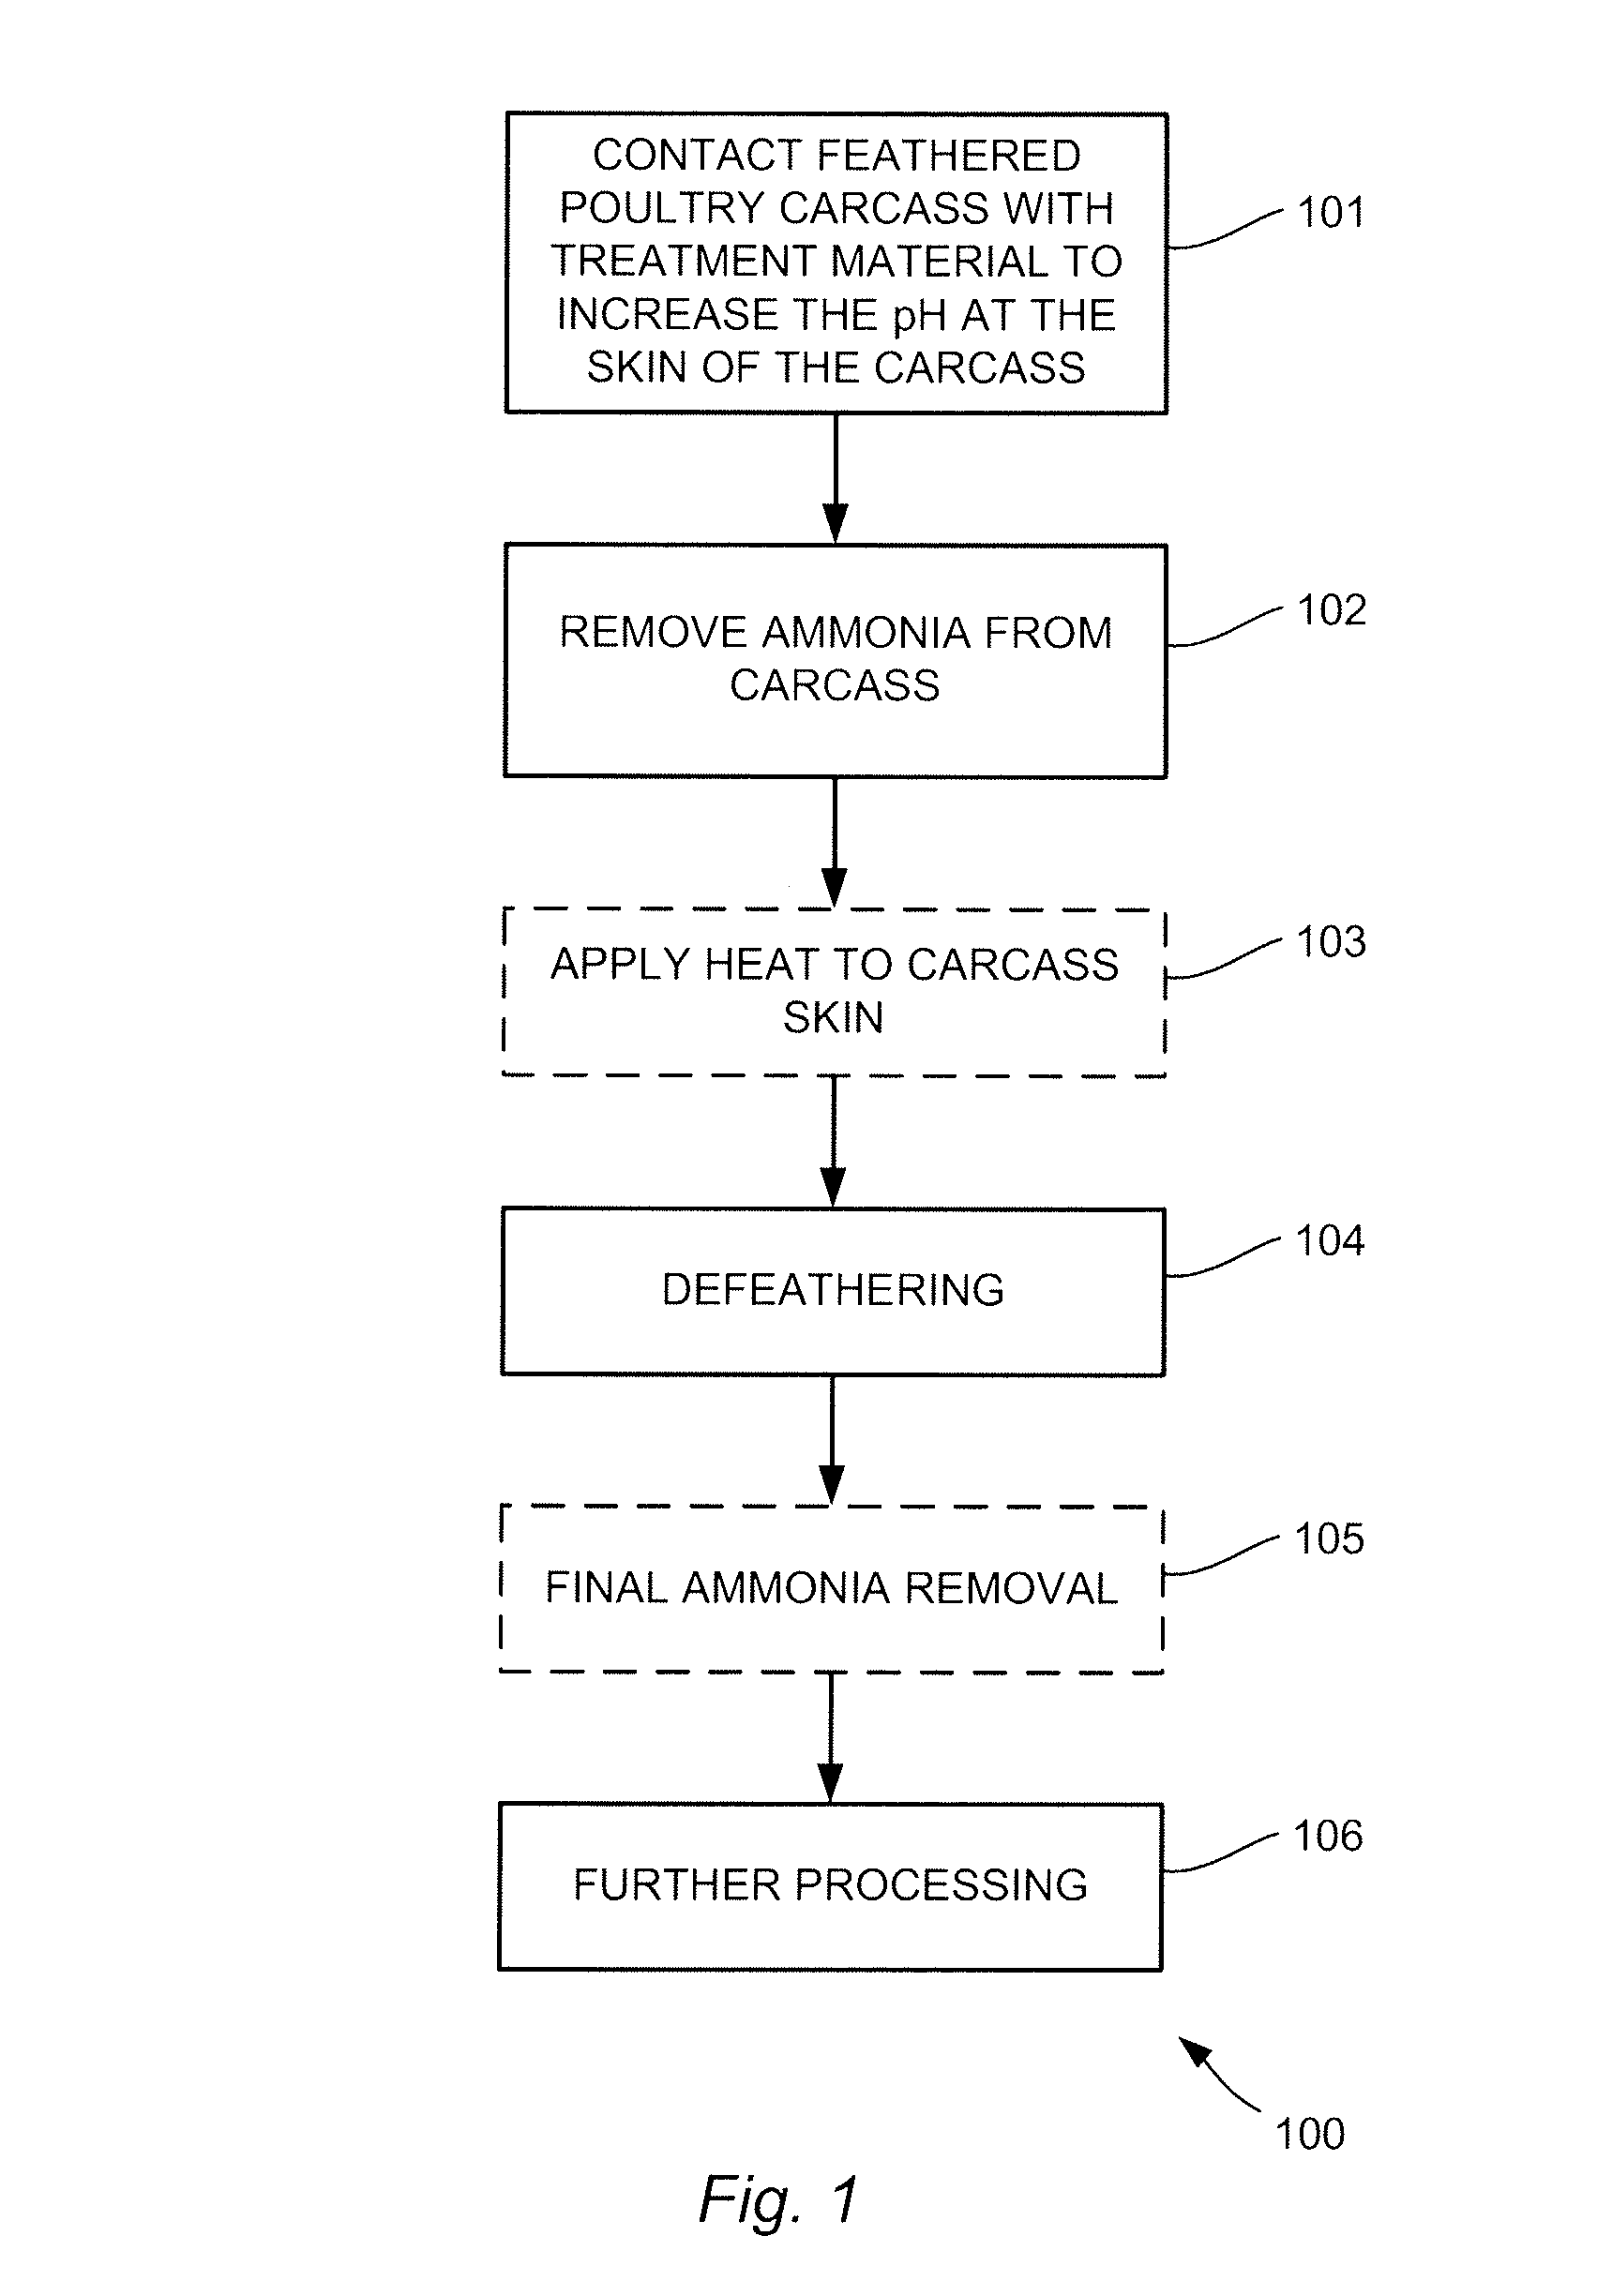 Method and apparatus for preparing poultry carcasses for defeathering operations